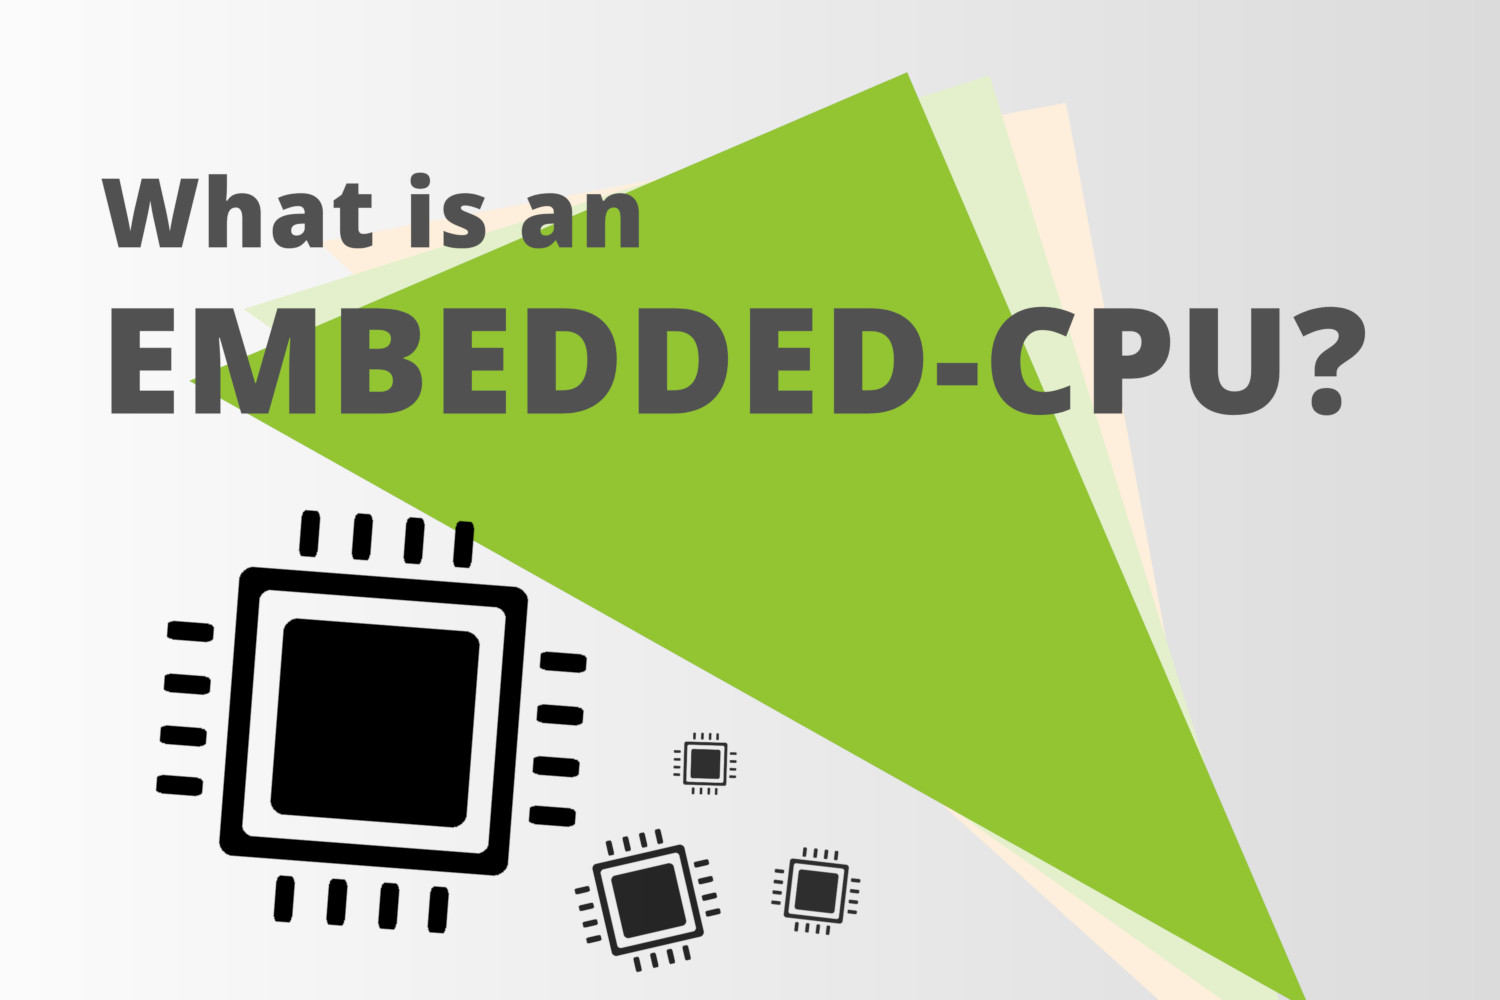 Nice to know: What is an Embedded-CPU?